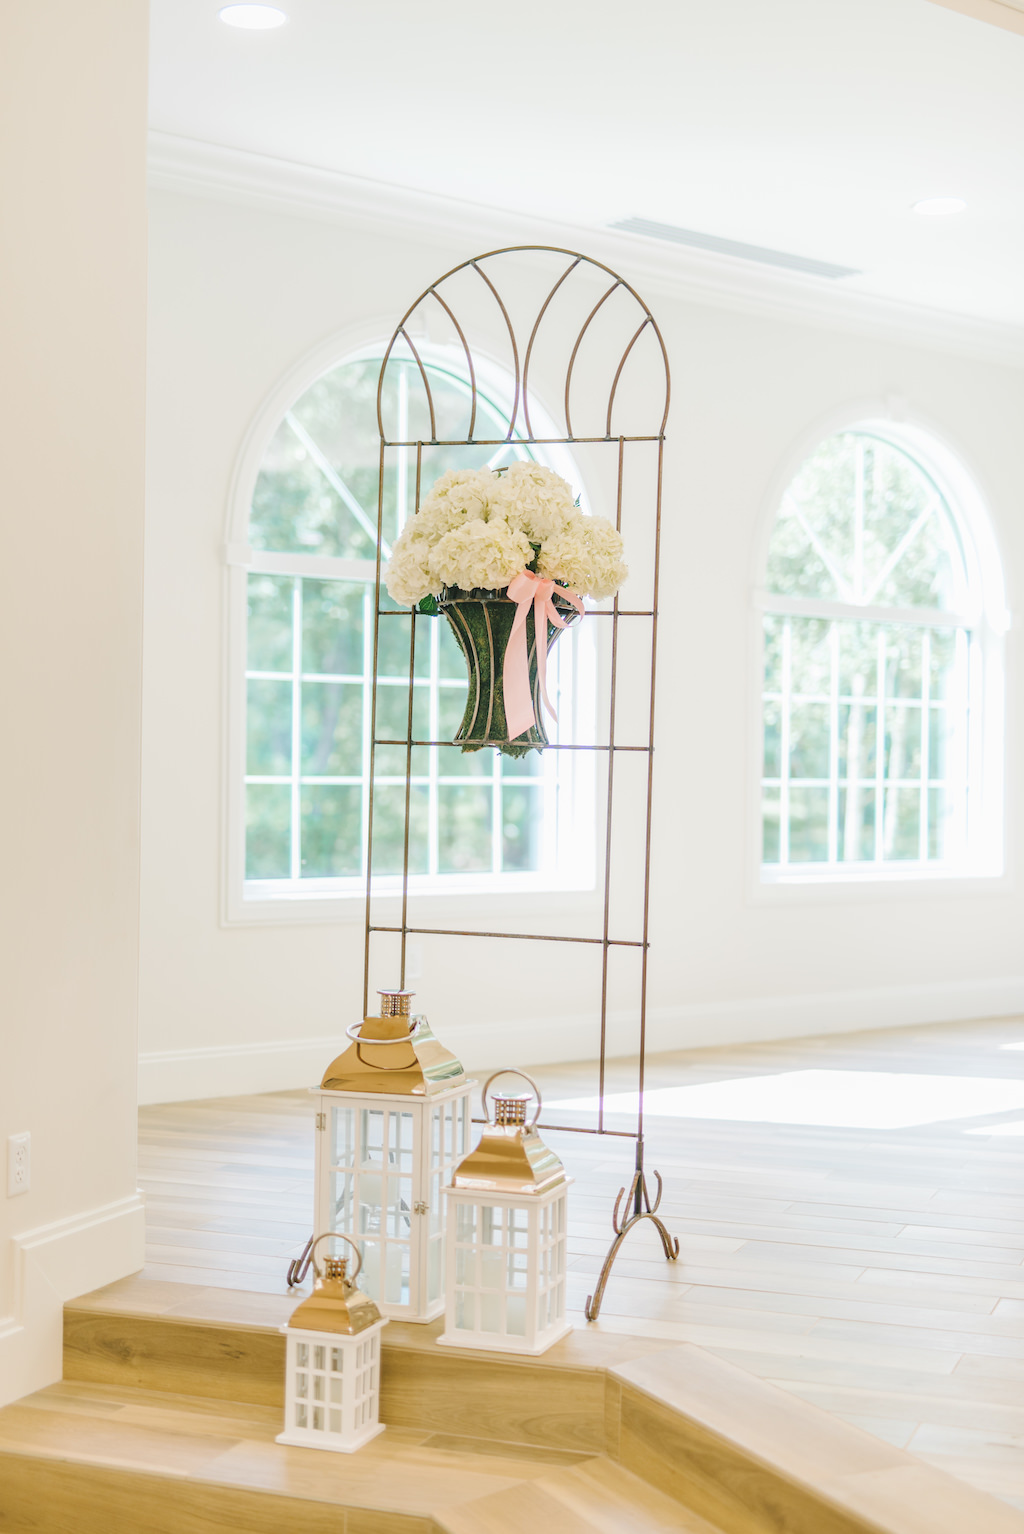 White Floral and Pink Ribbon Wedding Ceremony Decor on Metal Stand with White and Gold Lanterns | Safety Harbor Wedding Ceremony Venue Harborside Chapel | Clearwater Beach Photographer Kera Photography | Apple Blossoms Floral Designs